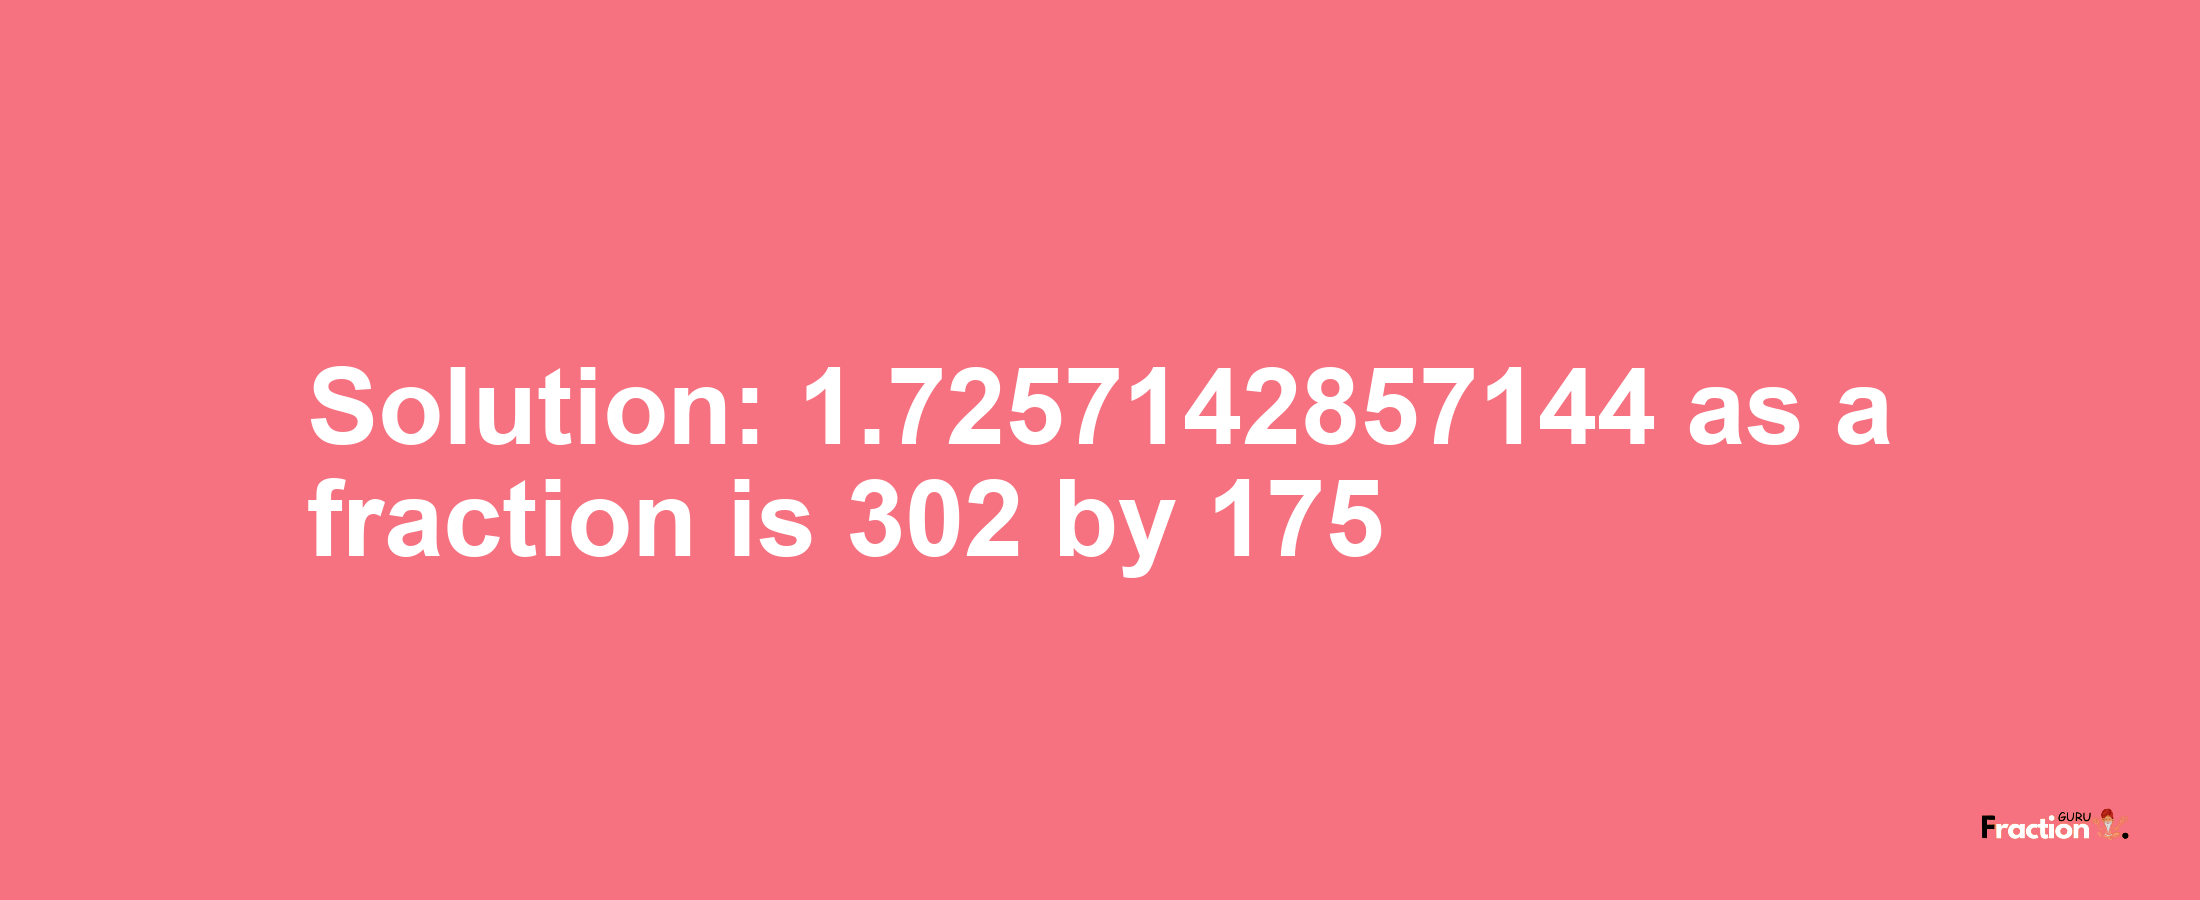 Solution:1.7257142857144 as a fraction is 302/175